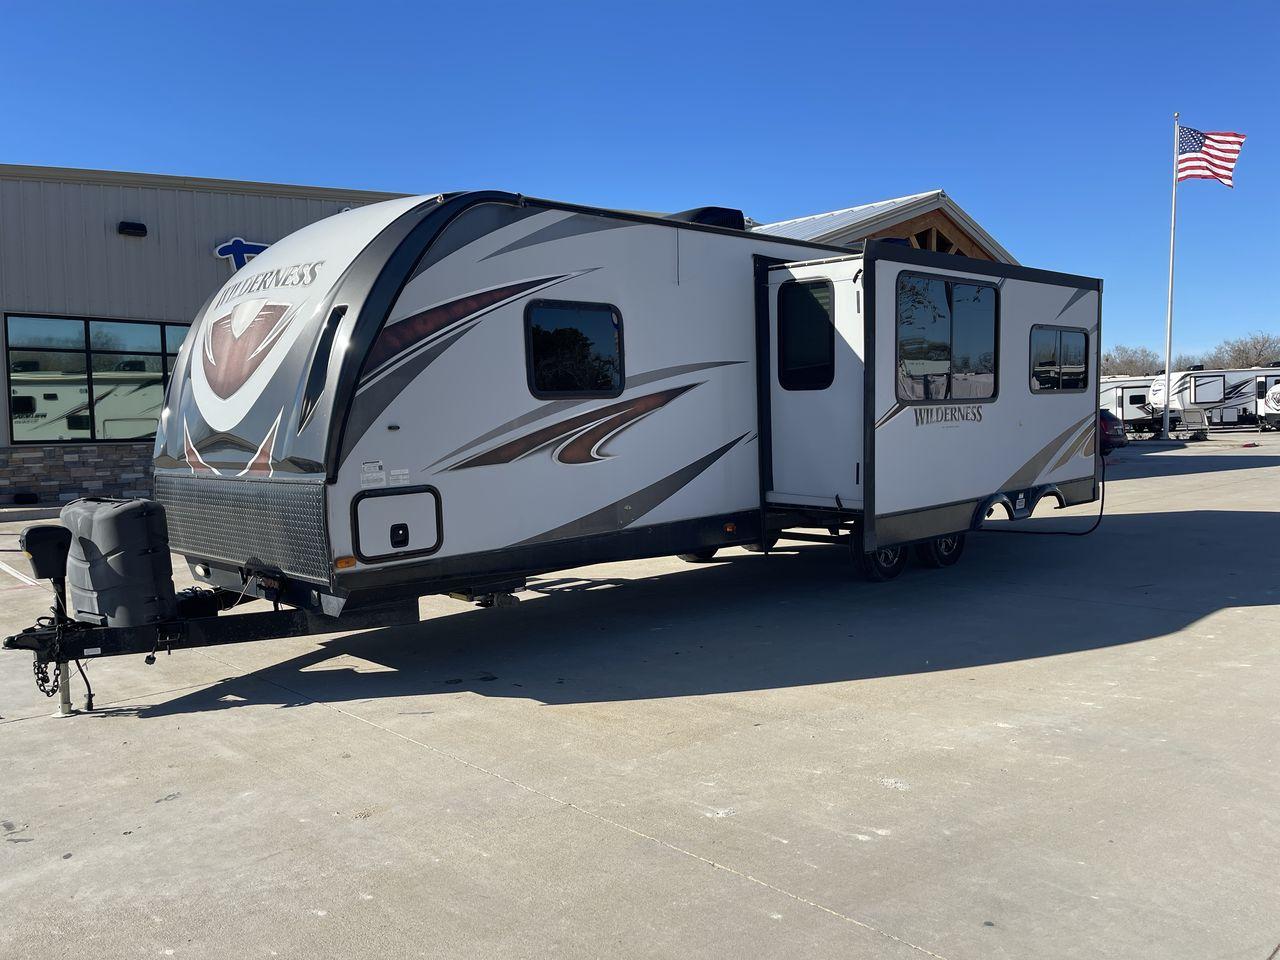 2018 GRAY HEARTLAND WILDERNESS USED 3125 (5SFNB3526JE) , Length: 35.75 ft. | Dry Weight: 6,840 lbs. | Gross Weight: 8,600 lbs. | Slides: 1 transmission, located at 4319 N Main Street, Cleburne, TX, 76033, (817) 221-0660, 32.435829, -97.384178 - Discover your inner adventurer with the Heartland Wilderness 3125 travel trailer from 2018. This RV offers the ideal balance of roomy living, contemporary conveniences, and tough sturdiness for your outdoor adventures. It is designed for individuals who desire both comfort and exploration. The di - Photo #23